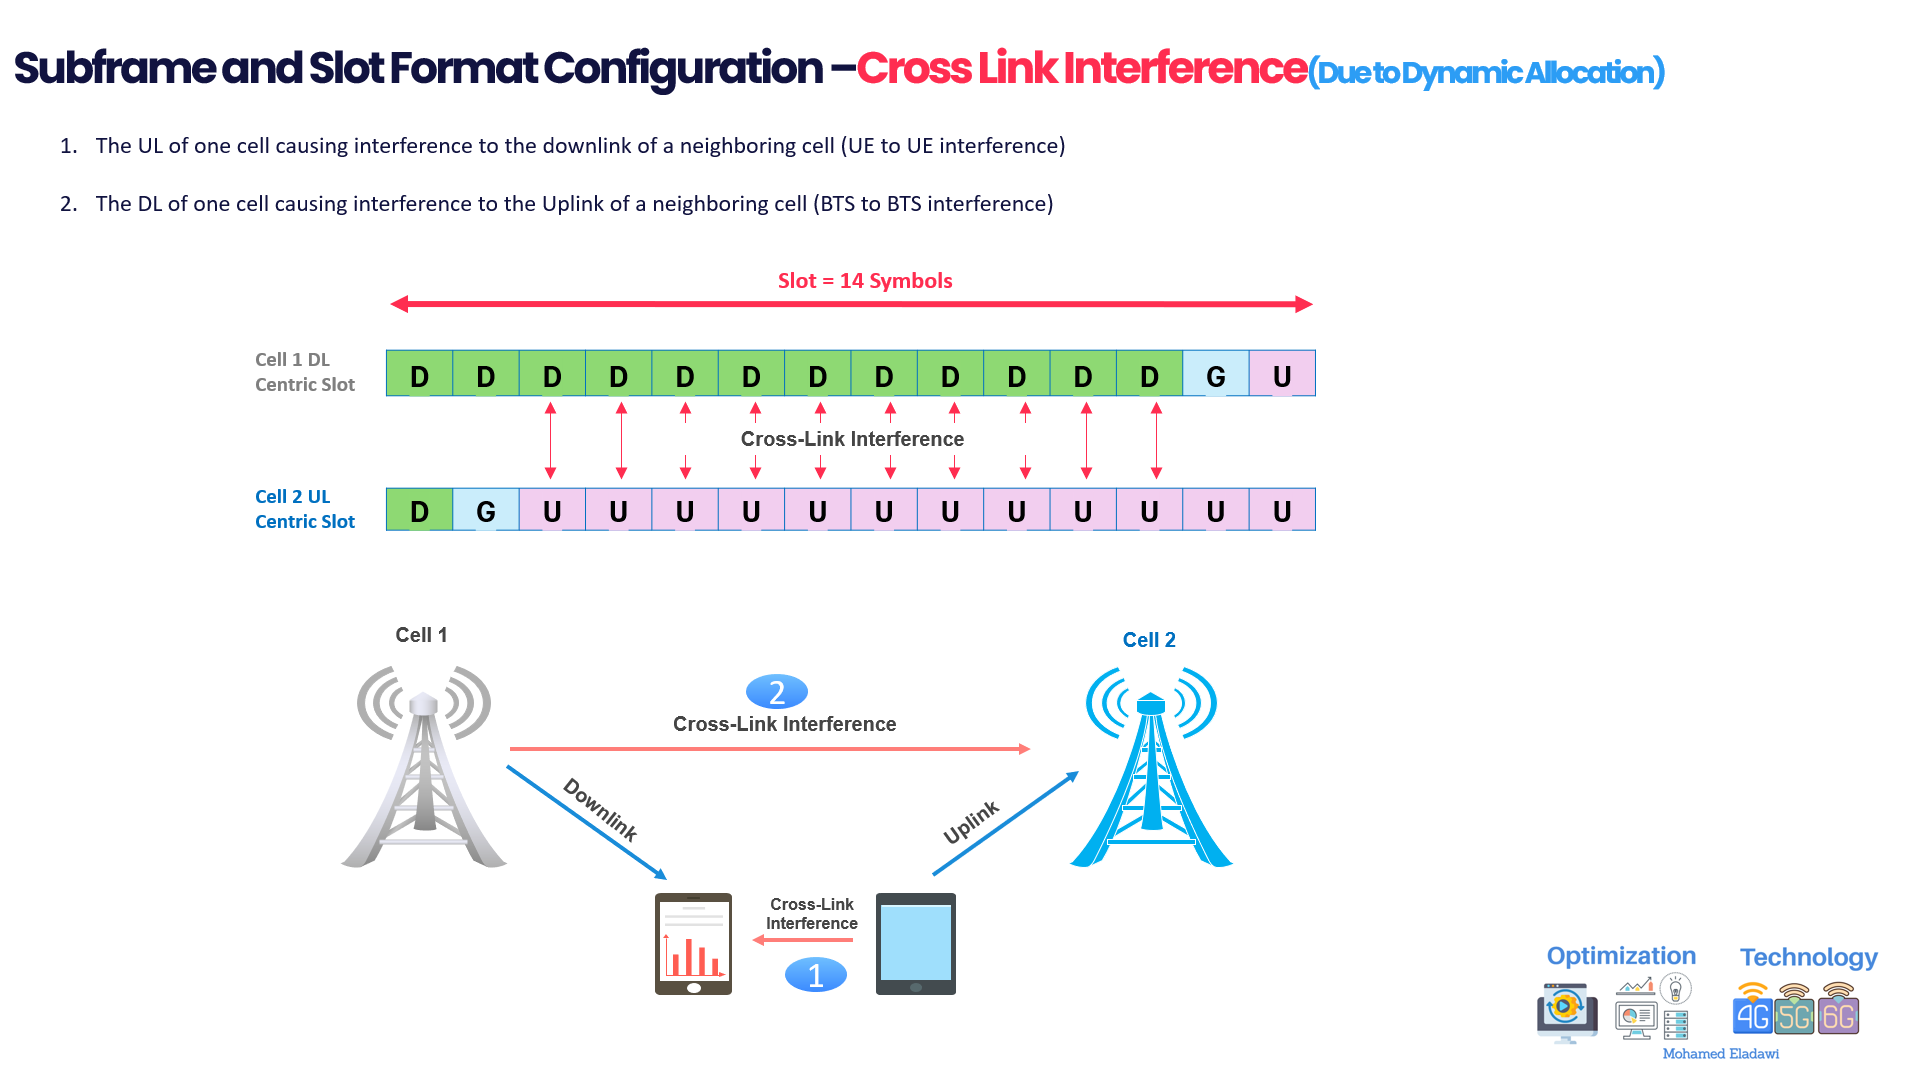 5G Cross-Link Interference: Understanding the Challenges of 4G-LTE Coexistence and Dynamic TDD